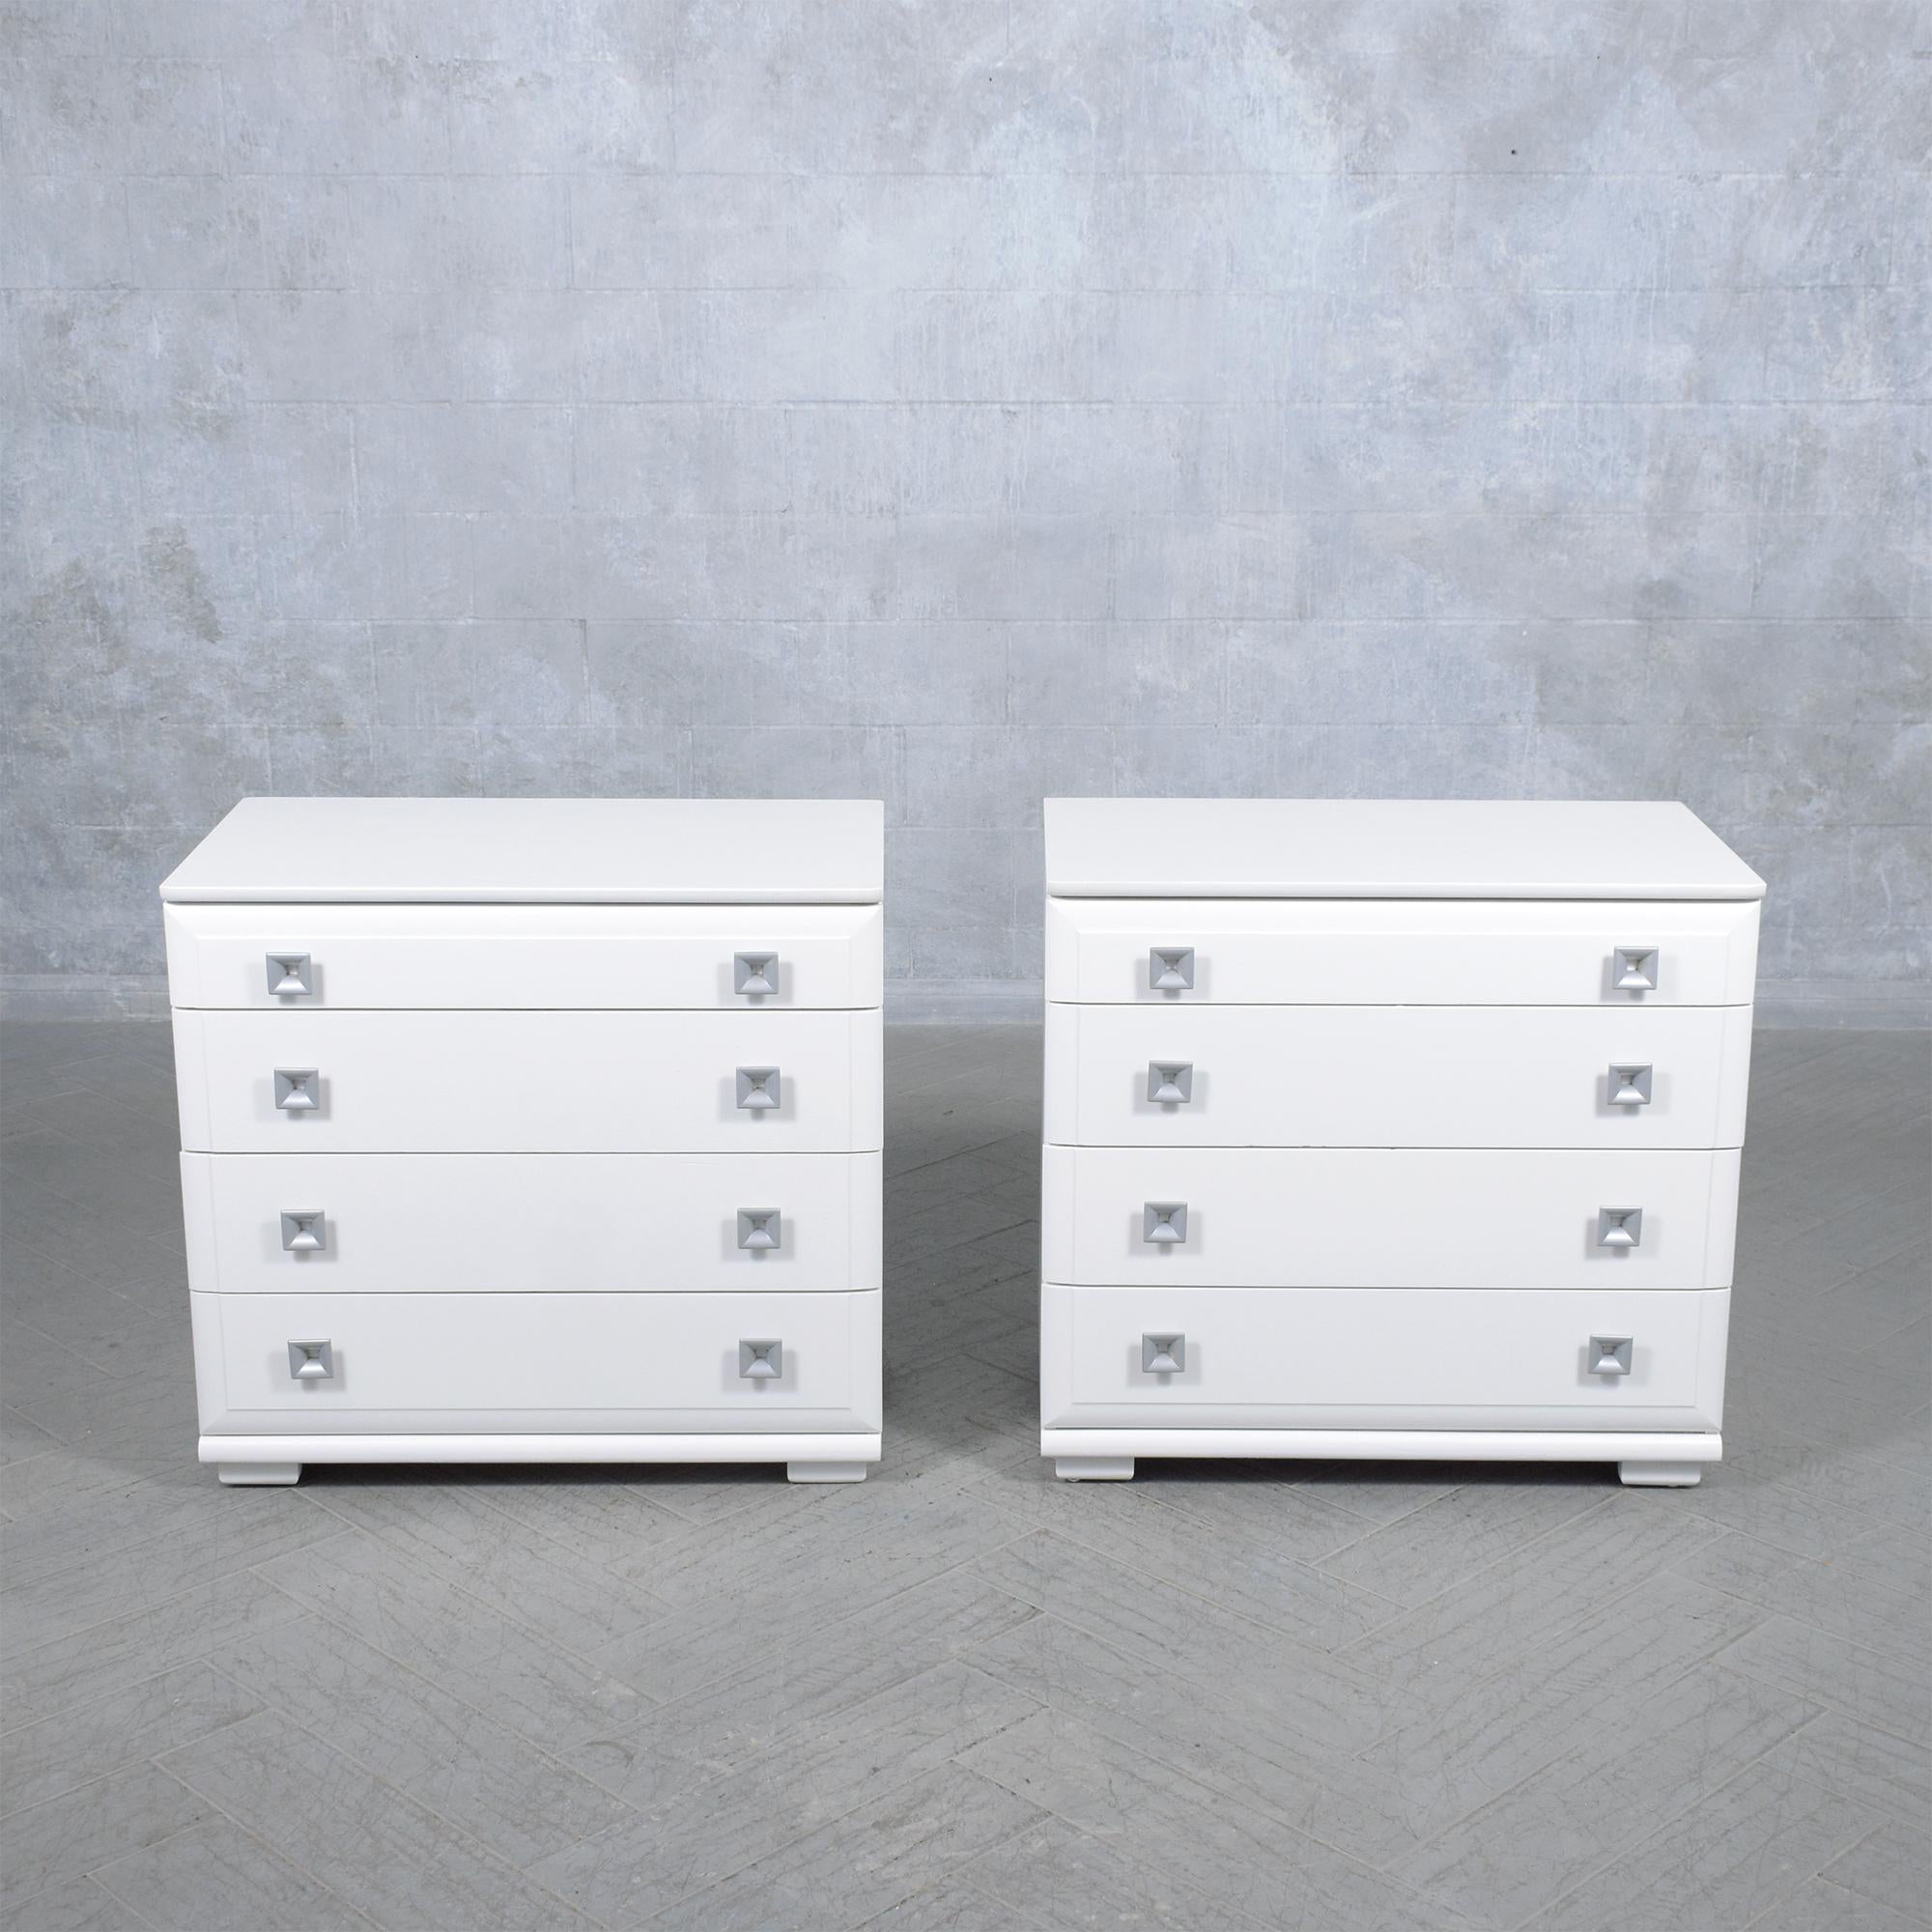 Elevate your living space with the sophisticated charm of our modern oak wood dressers, a stunning pair that marries exceptional craftsmanship with contemporary flair. These mid-century-inspired dressers have been lovingly restored by our dedicated